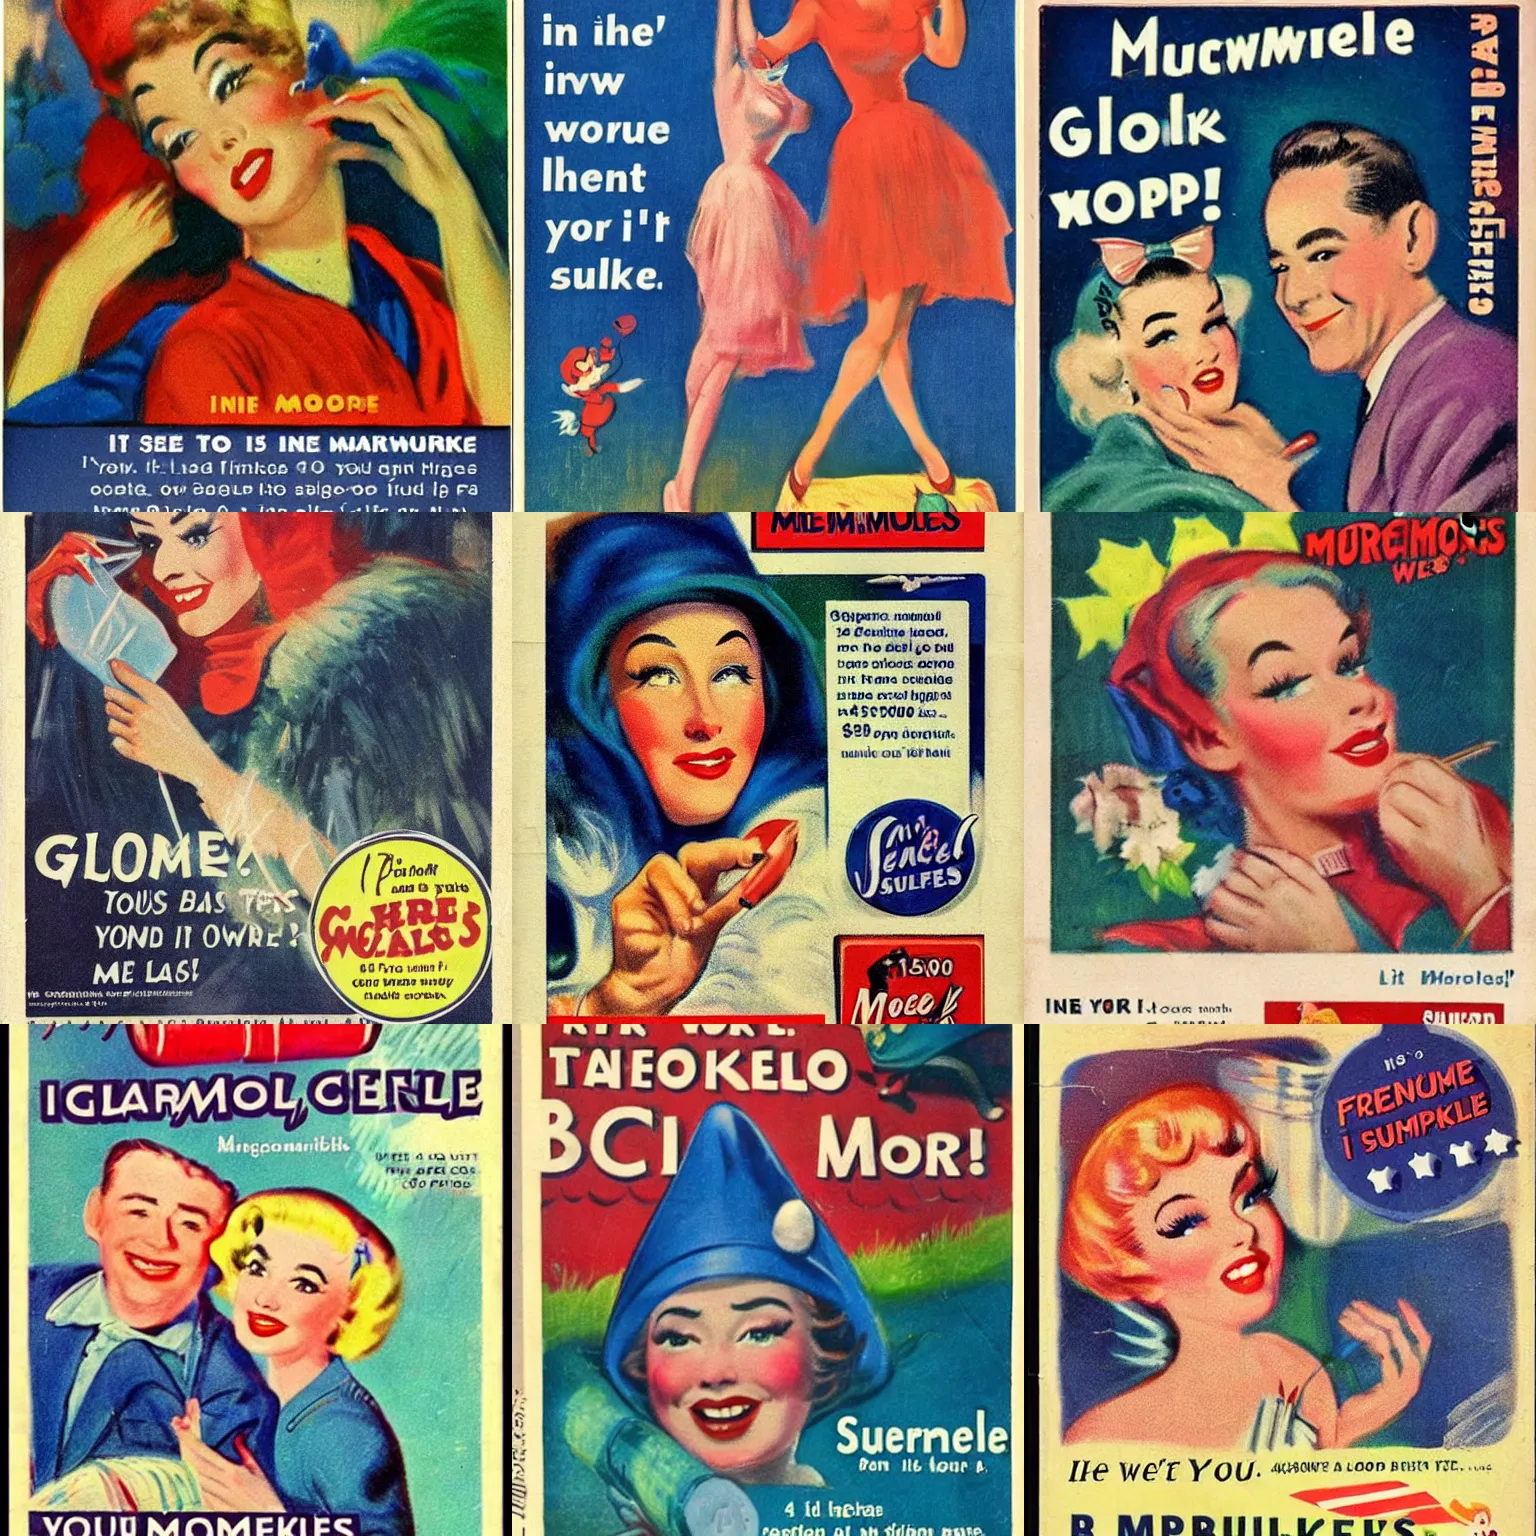 Prompt: this video has been brought to you by our sponsors glackensmoops. when you ’ re in a bind, the last place you want to be, is without glackensmoops, i ’ ll tell you that right now for free. 4 9 3 smurtle bucks. vintage 1 9 5 0 s advertisement